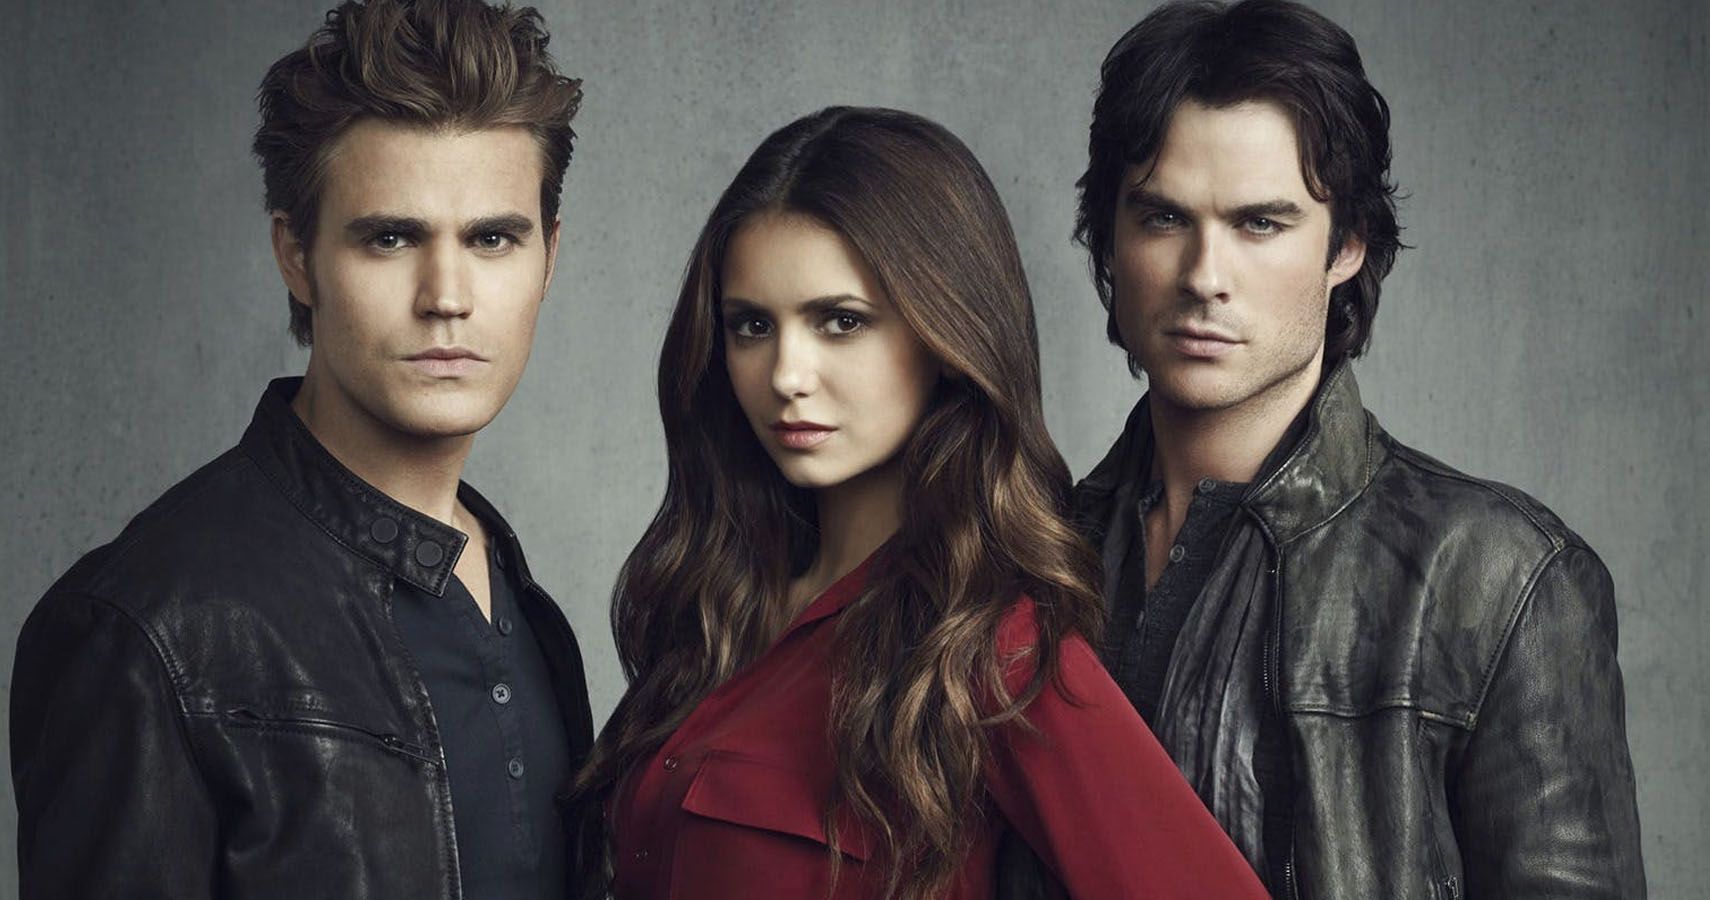 The Vampire Diaries 10 Shows & Movies Where The Cast Has Been In Since